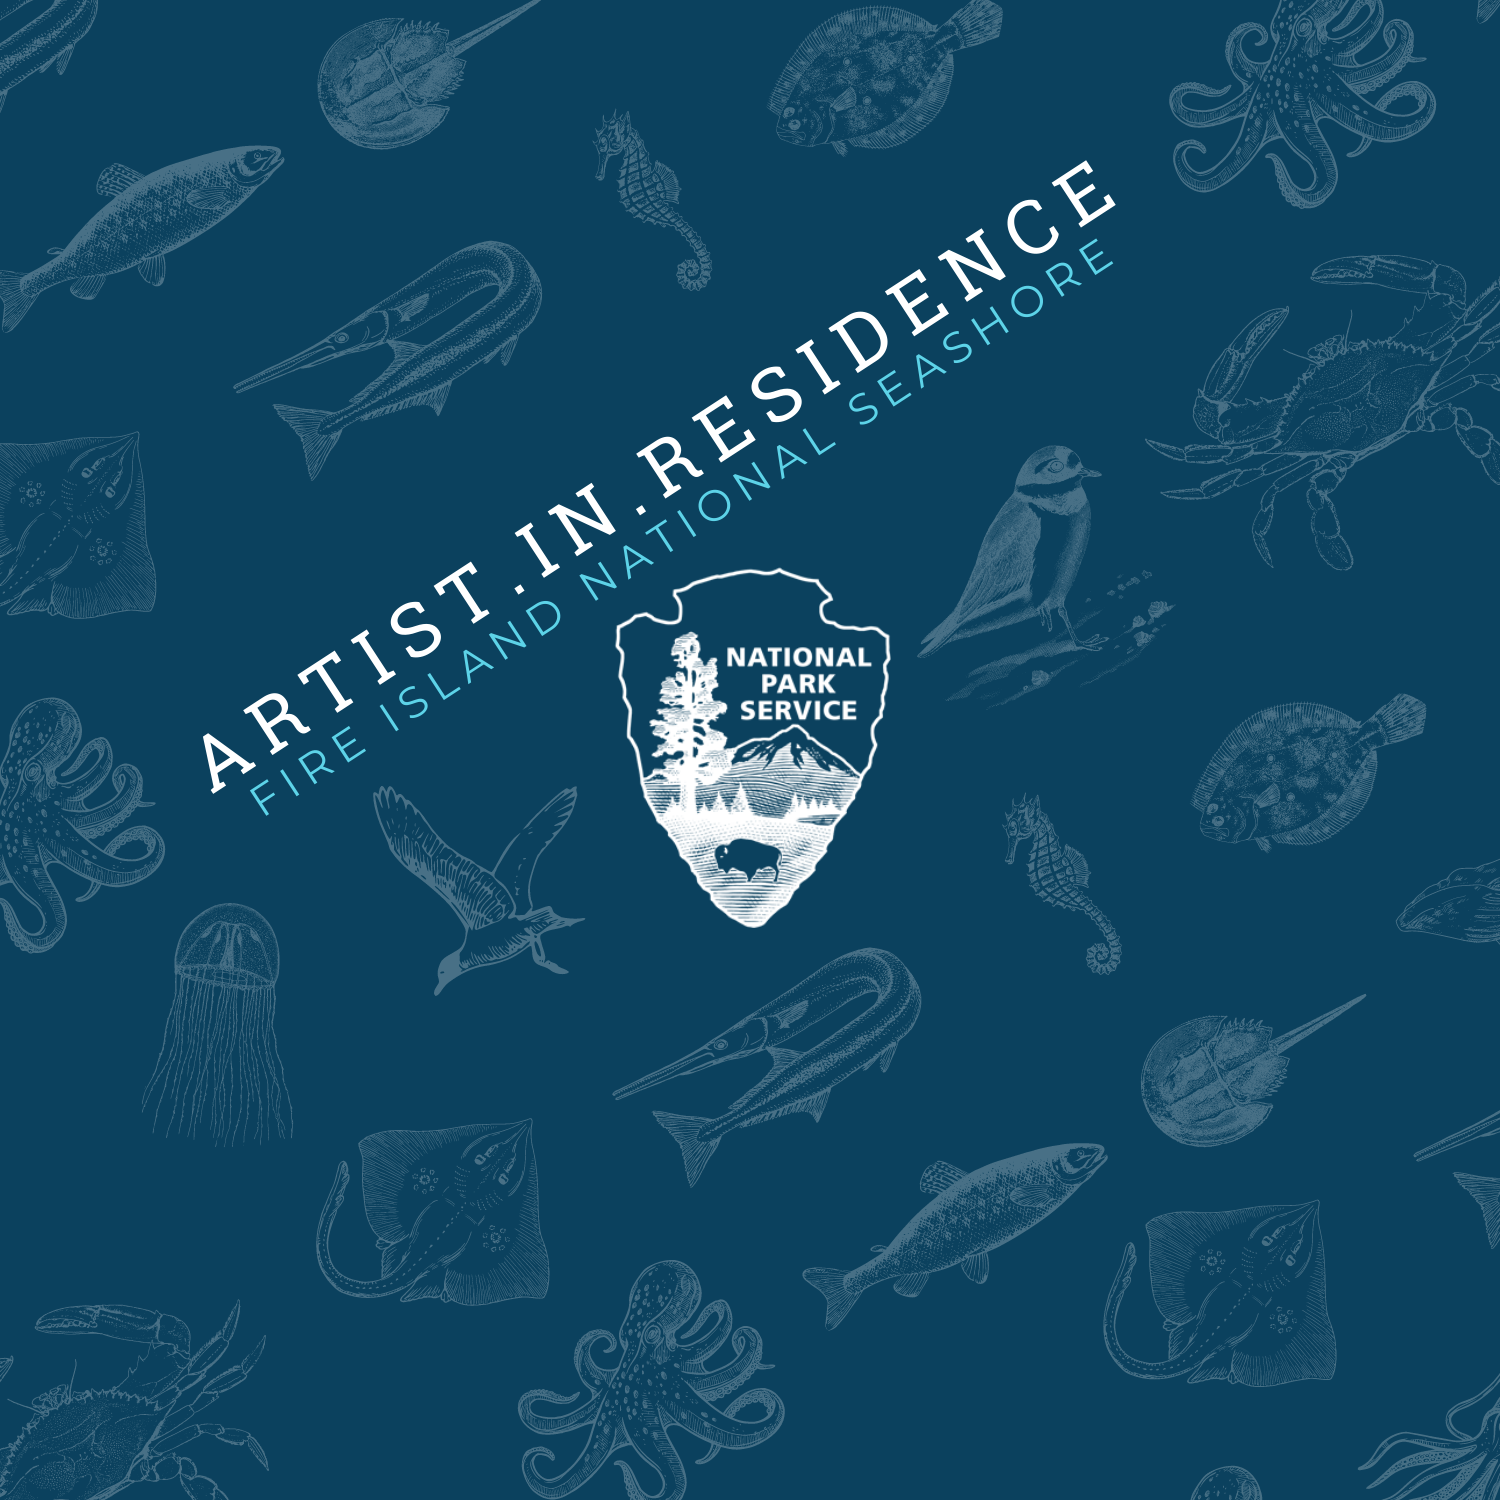 A blue and white graphic features a National Park Service logo and an assortment of illustrated seashore creatures. Text reads "Artist.In.Residence Fire Island National Seashore".